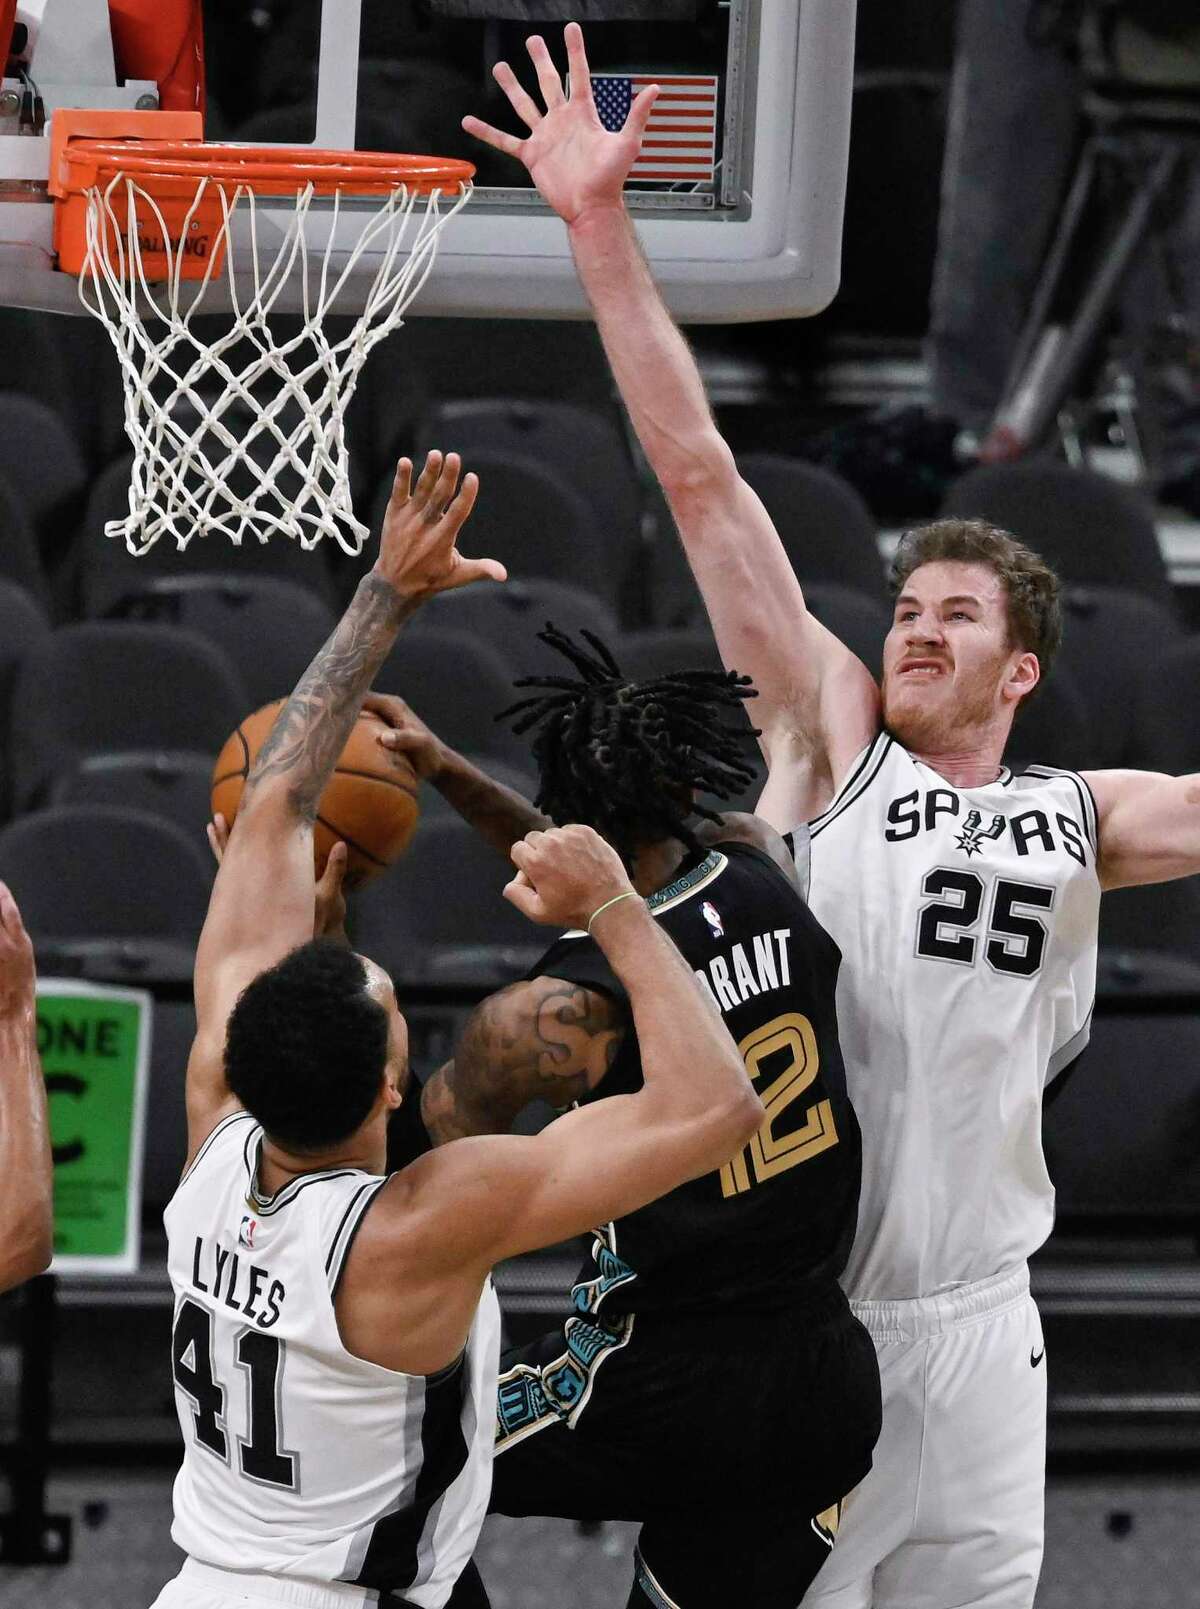 Memphis Grizzlies' Ja Morant, center, attempts to shoot against San Antonio Spurs' Jakob Poeltl (25) and Trey Lyles during the second half of an NBA basketball game, Saturday, Jan. 30, 2021, in San Antonio. (AP Photo/Darren Abate)